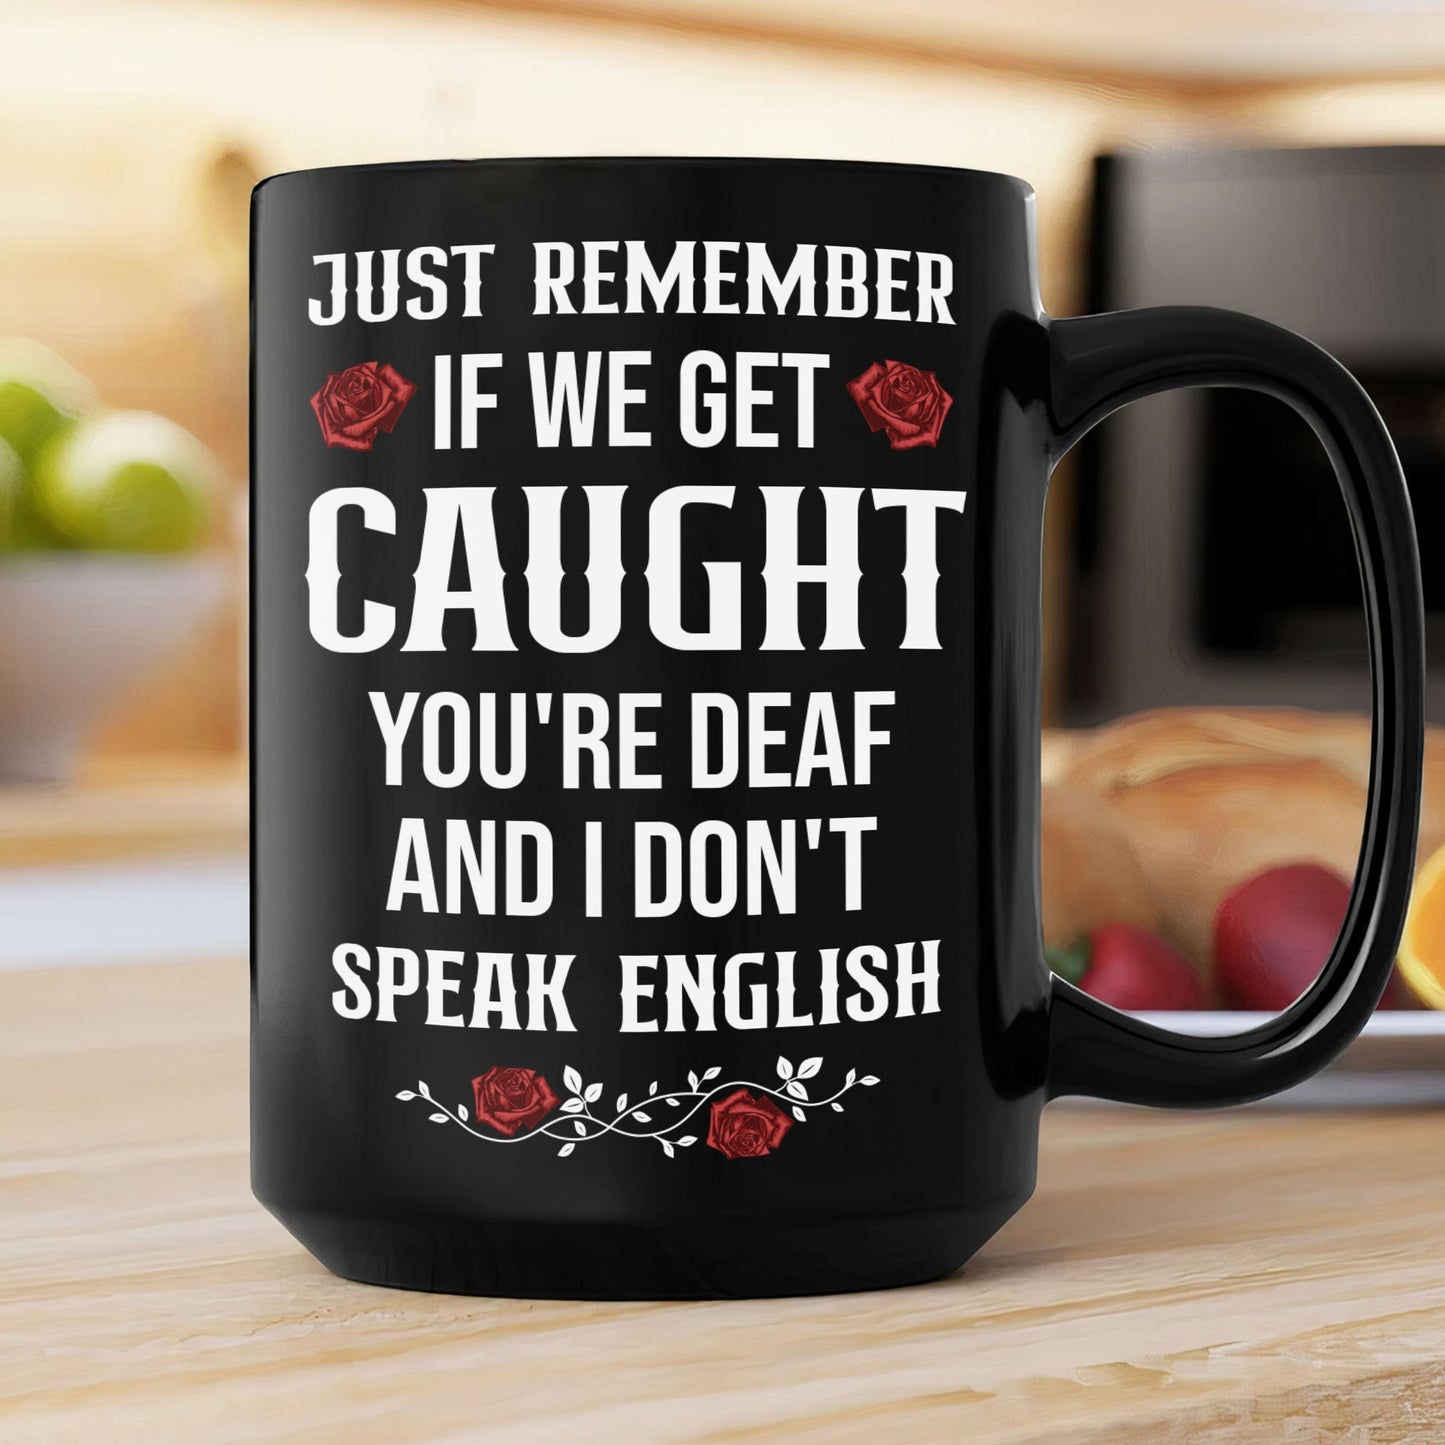 If We Get Caught You're Deaf And I Don't Speak English - Personalized Mug